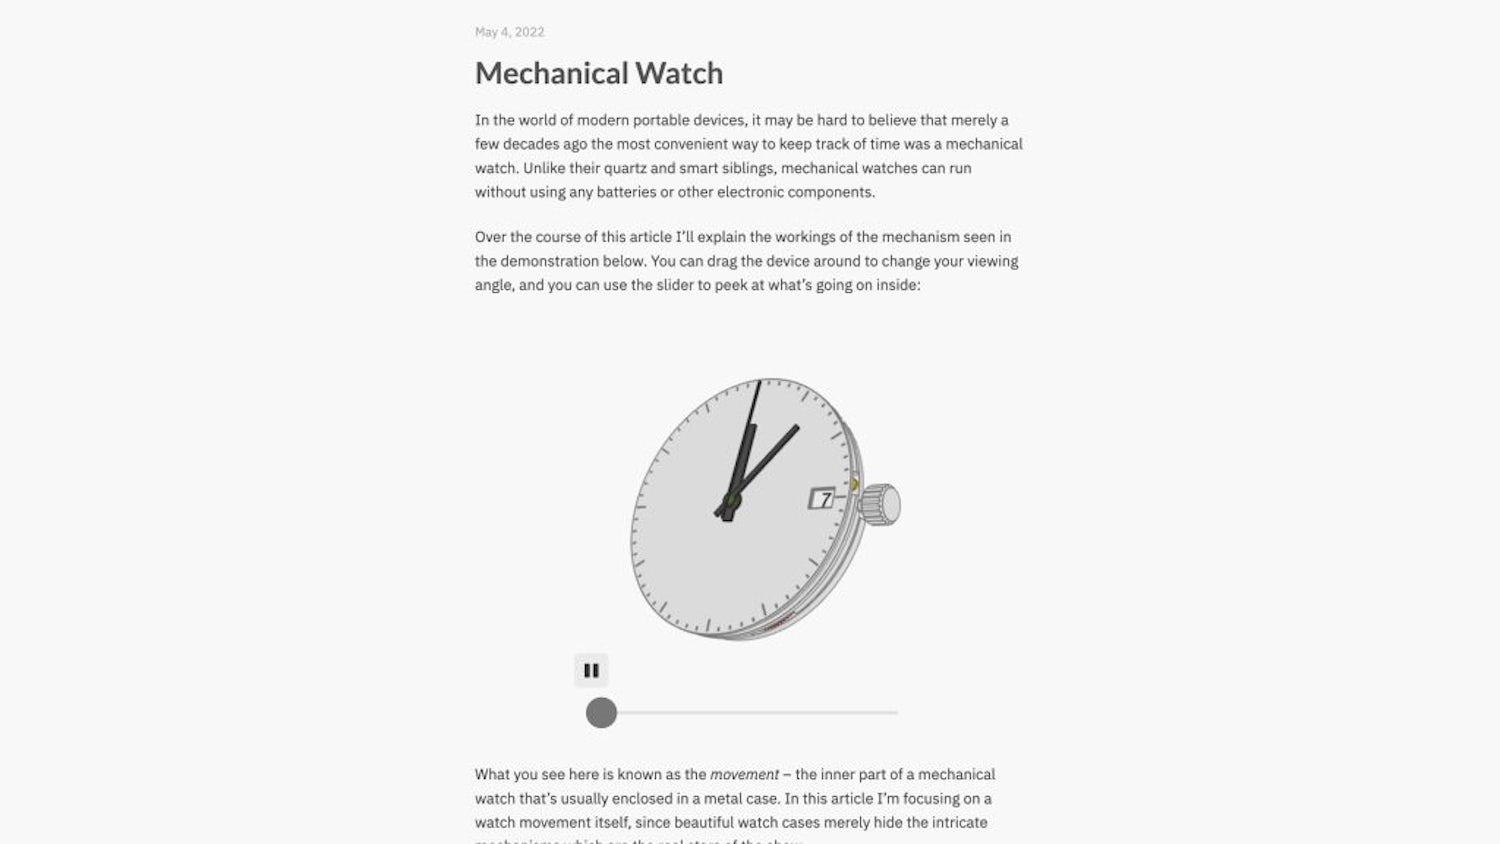 Mechanical Watch article opening with watch illustration